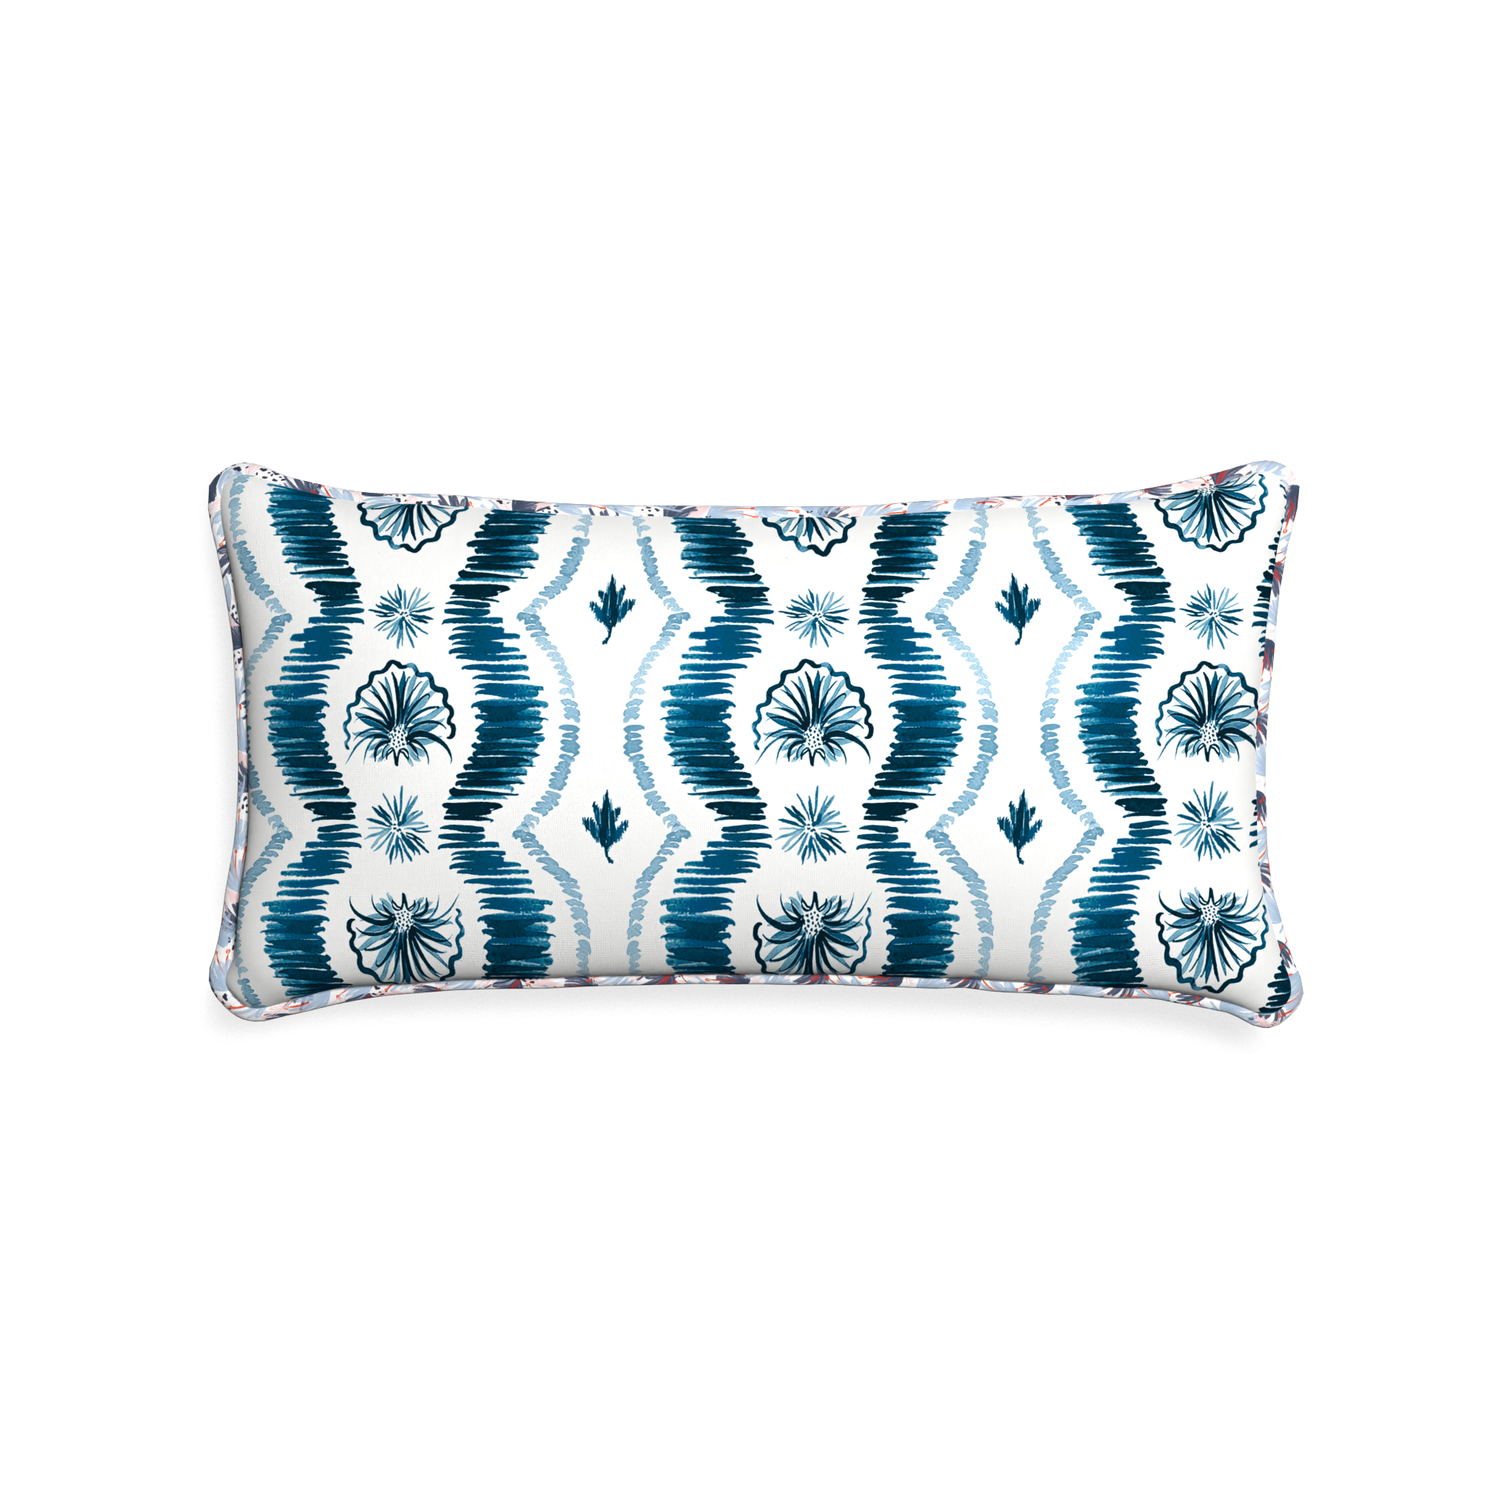 Midi-lumbar alice custom blue ikatpillow with e piping on white background